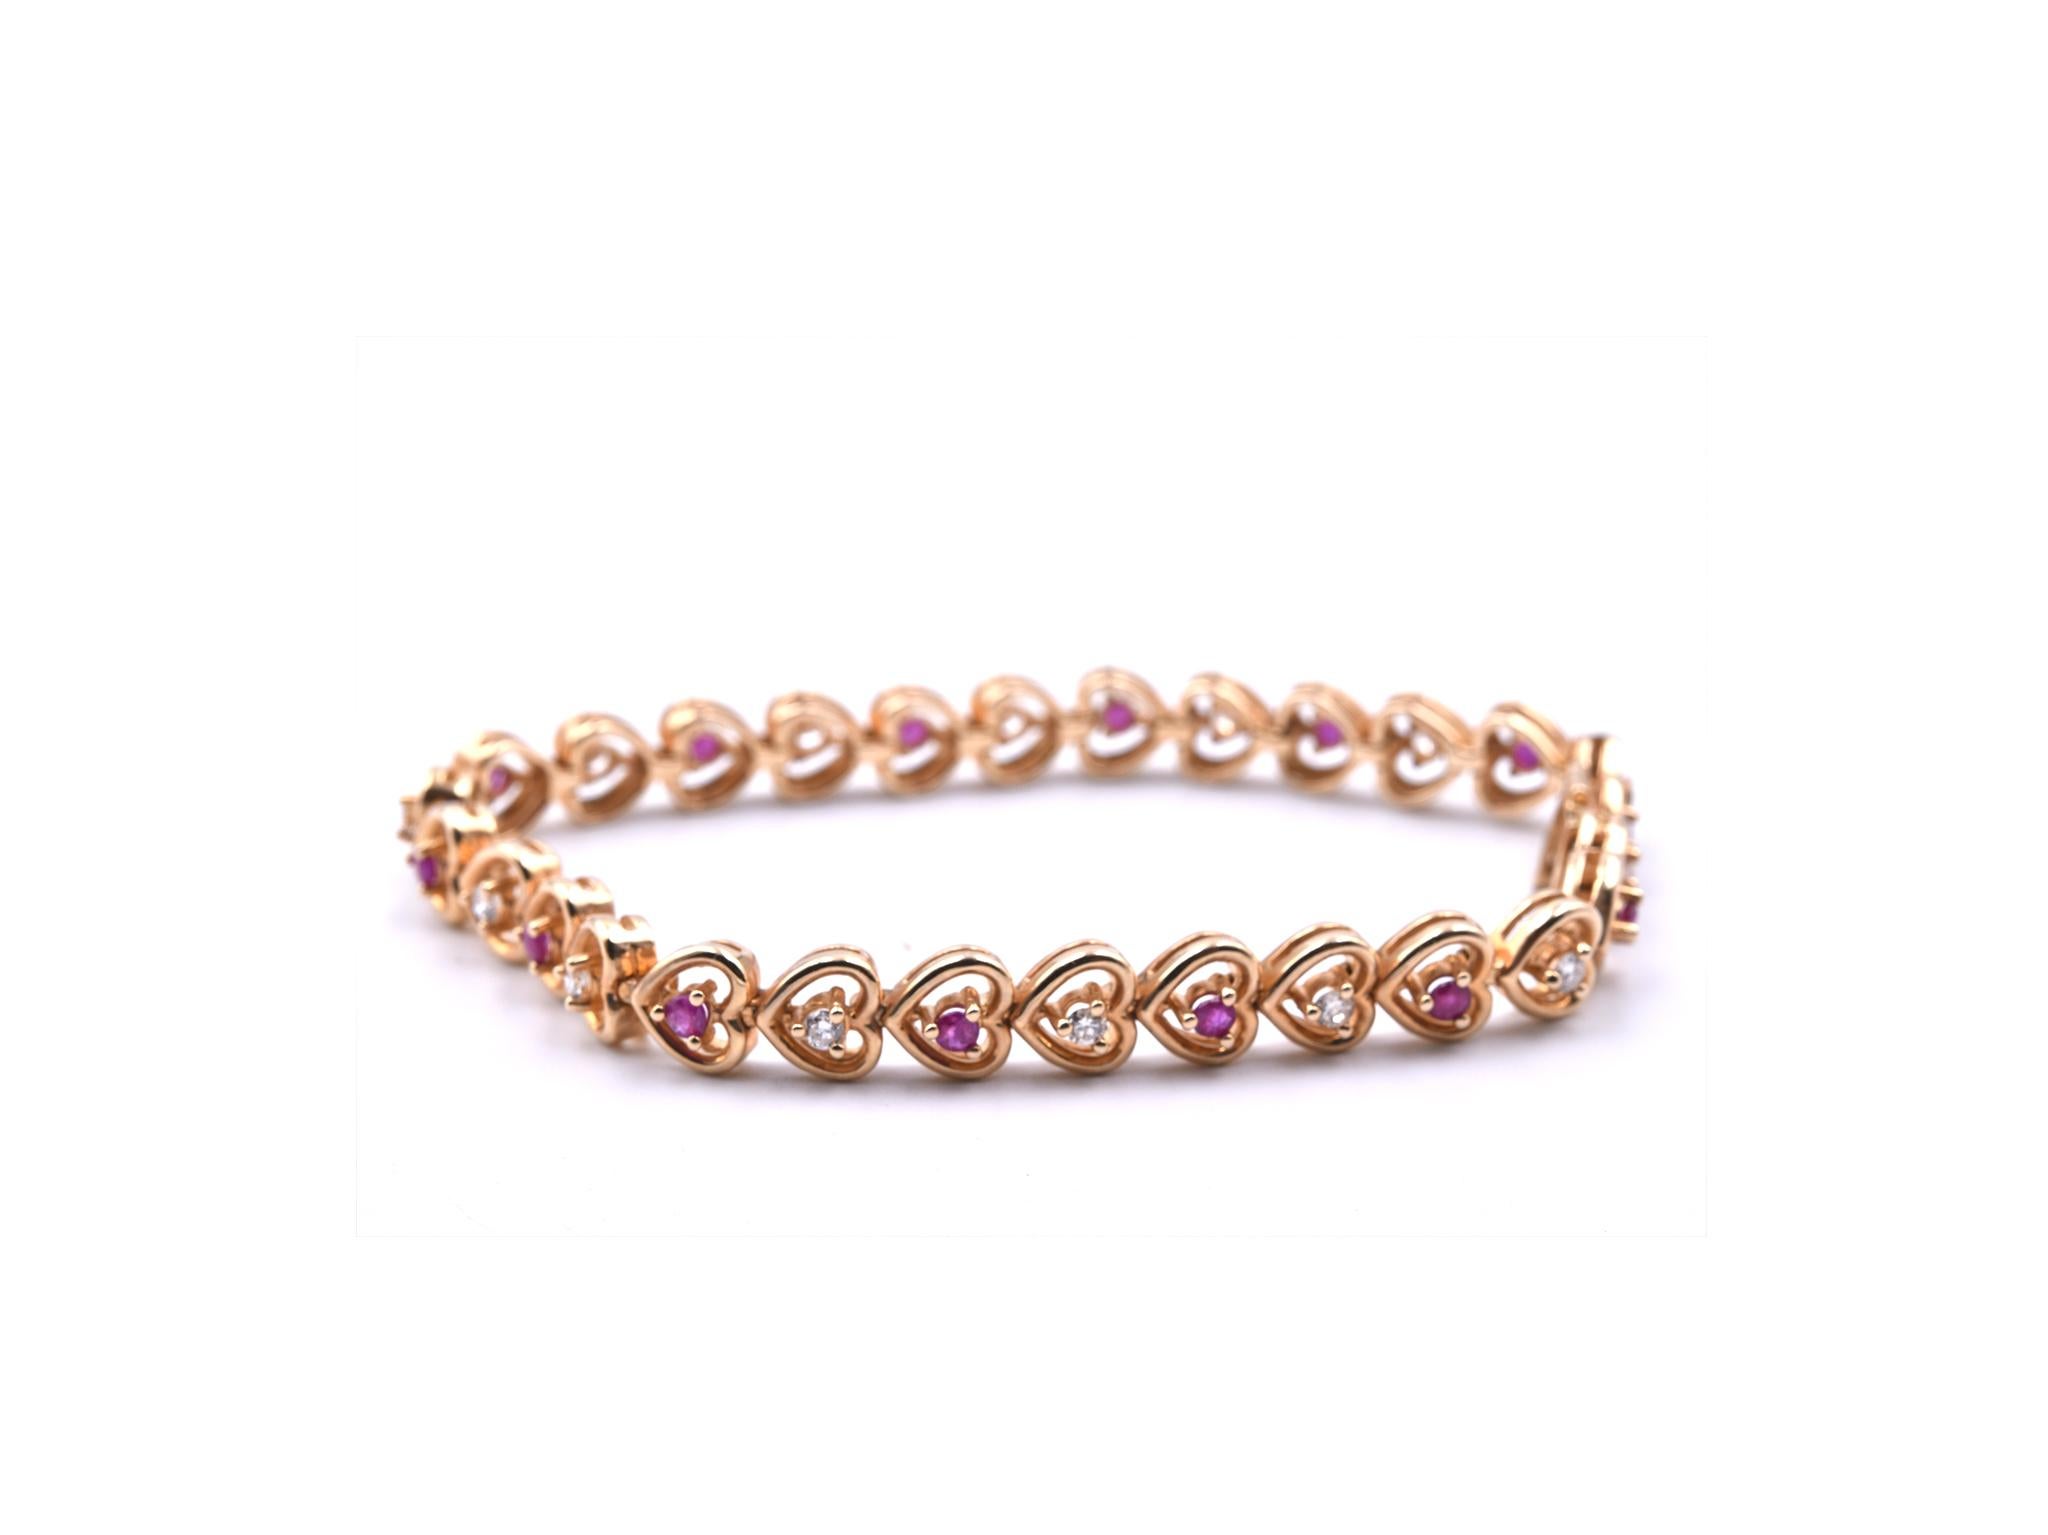 Designer: custom design
Material: 14k yellow gold
Diamond: 14=.45cttw
Color: H
Clarity: SI1
Ruby: 14 rubies 
Dimensions: bracelet is 6 ¾ inch long and 6.60 mm wide 
Weight: 15.29 grams
